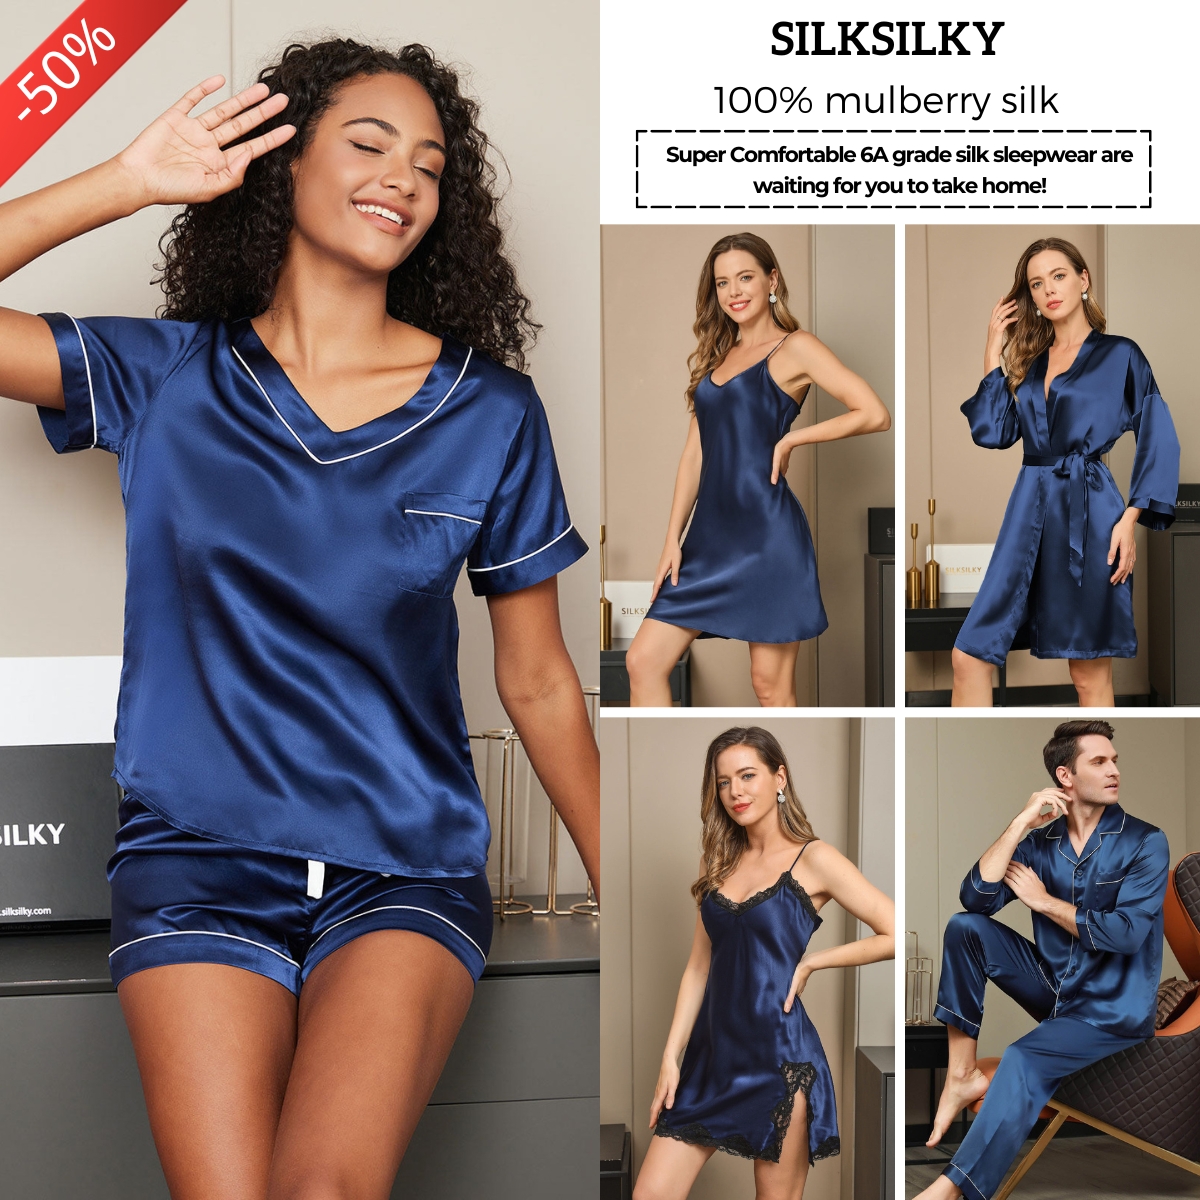 OPT For NEW SEASON Silk Pajamas: Belted Style, Binding-Trim Or Round  Neck - Silk Silky